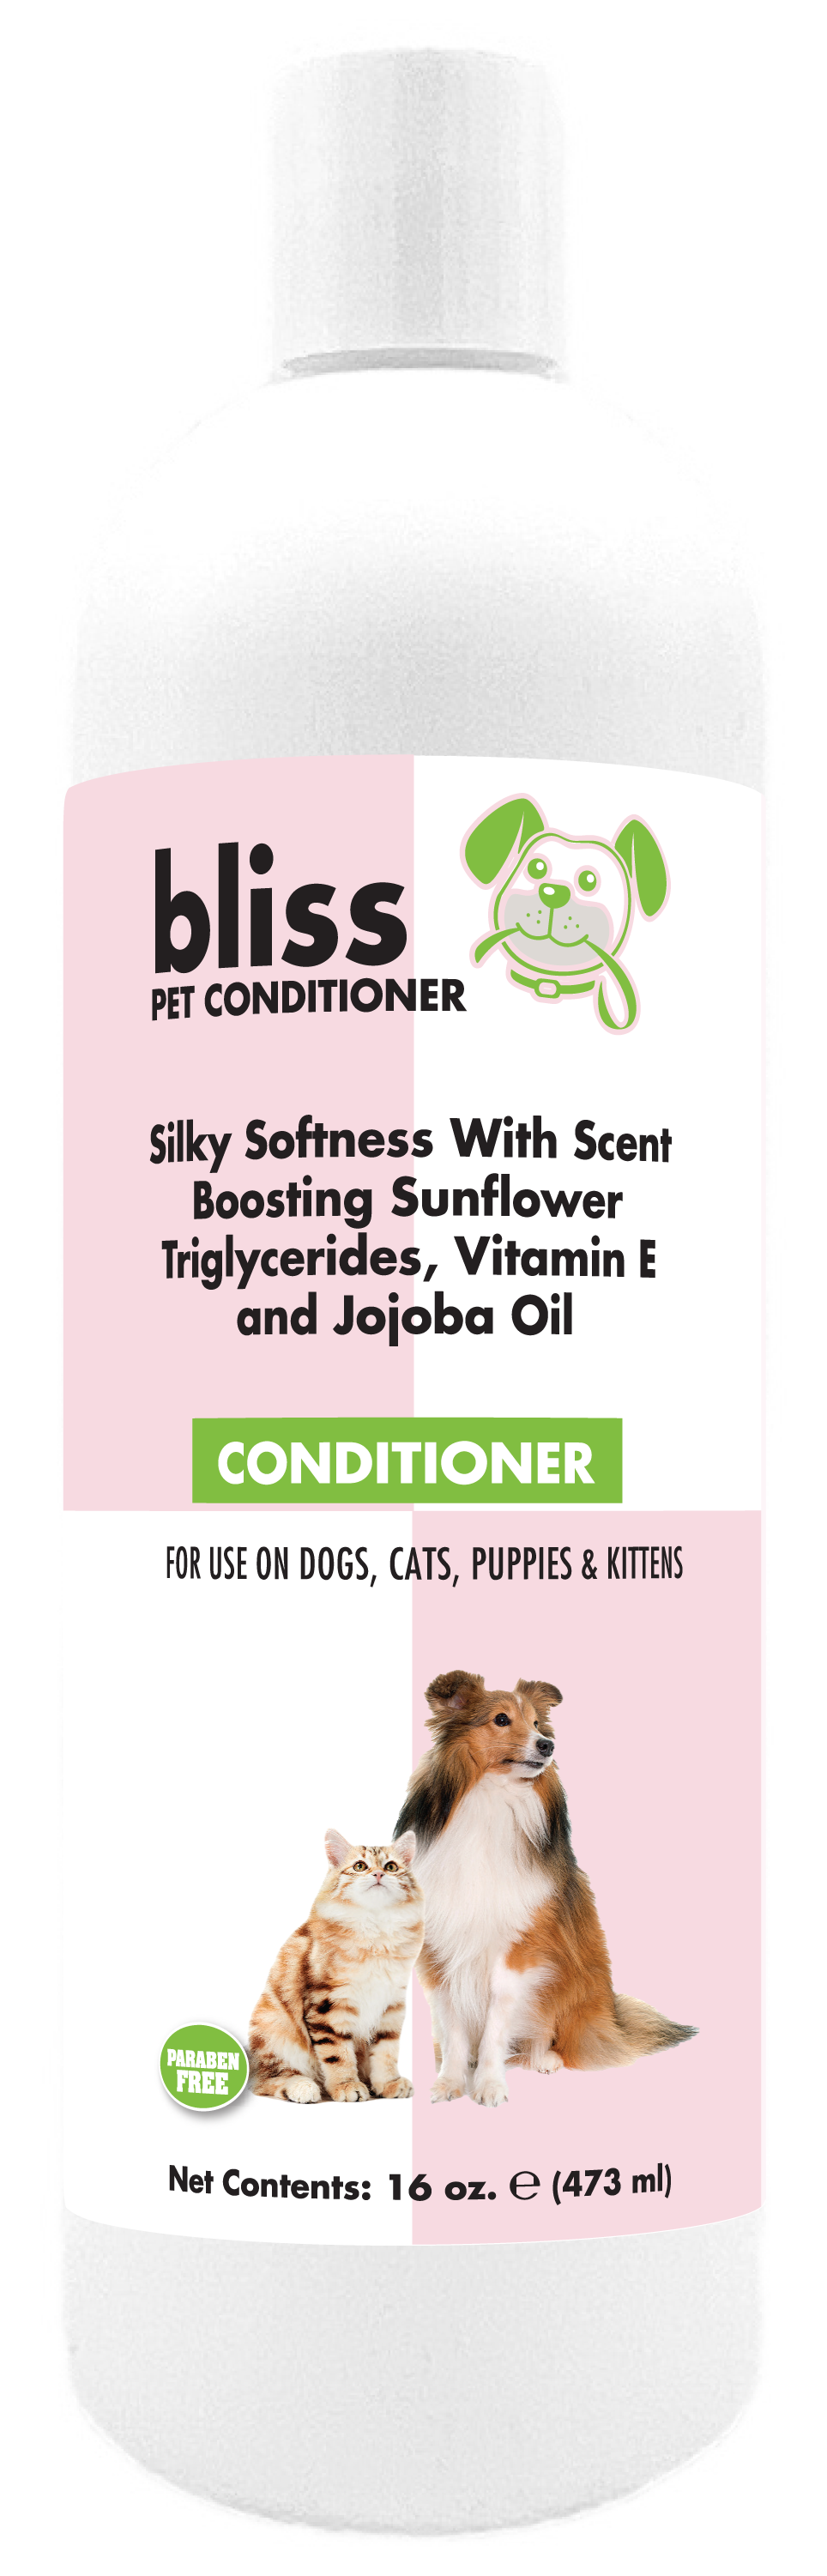 Bliss Pet Conditioner